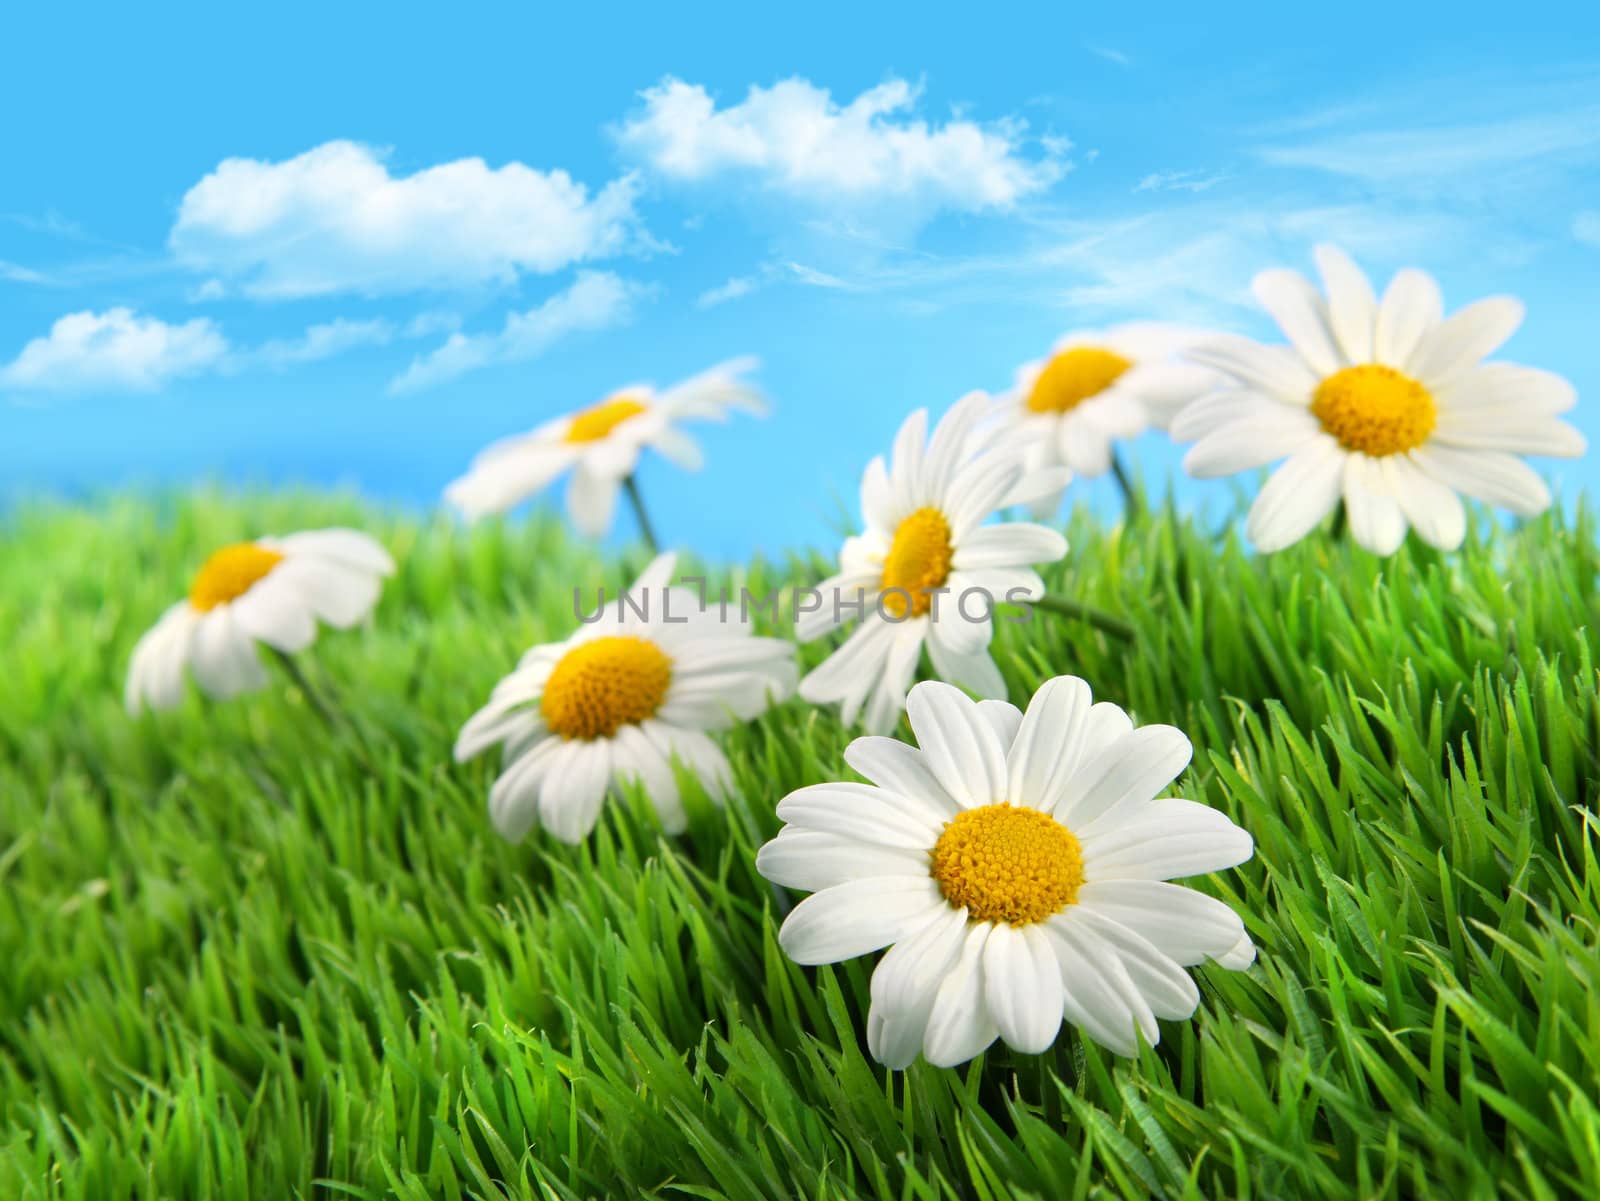 Daisies in grass against a blue sky by Sandralise